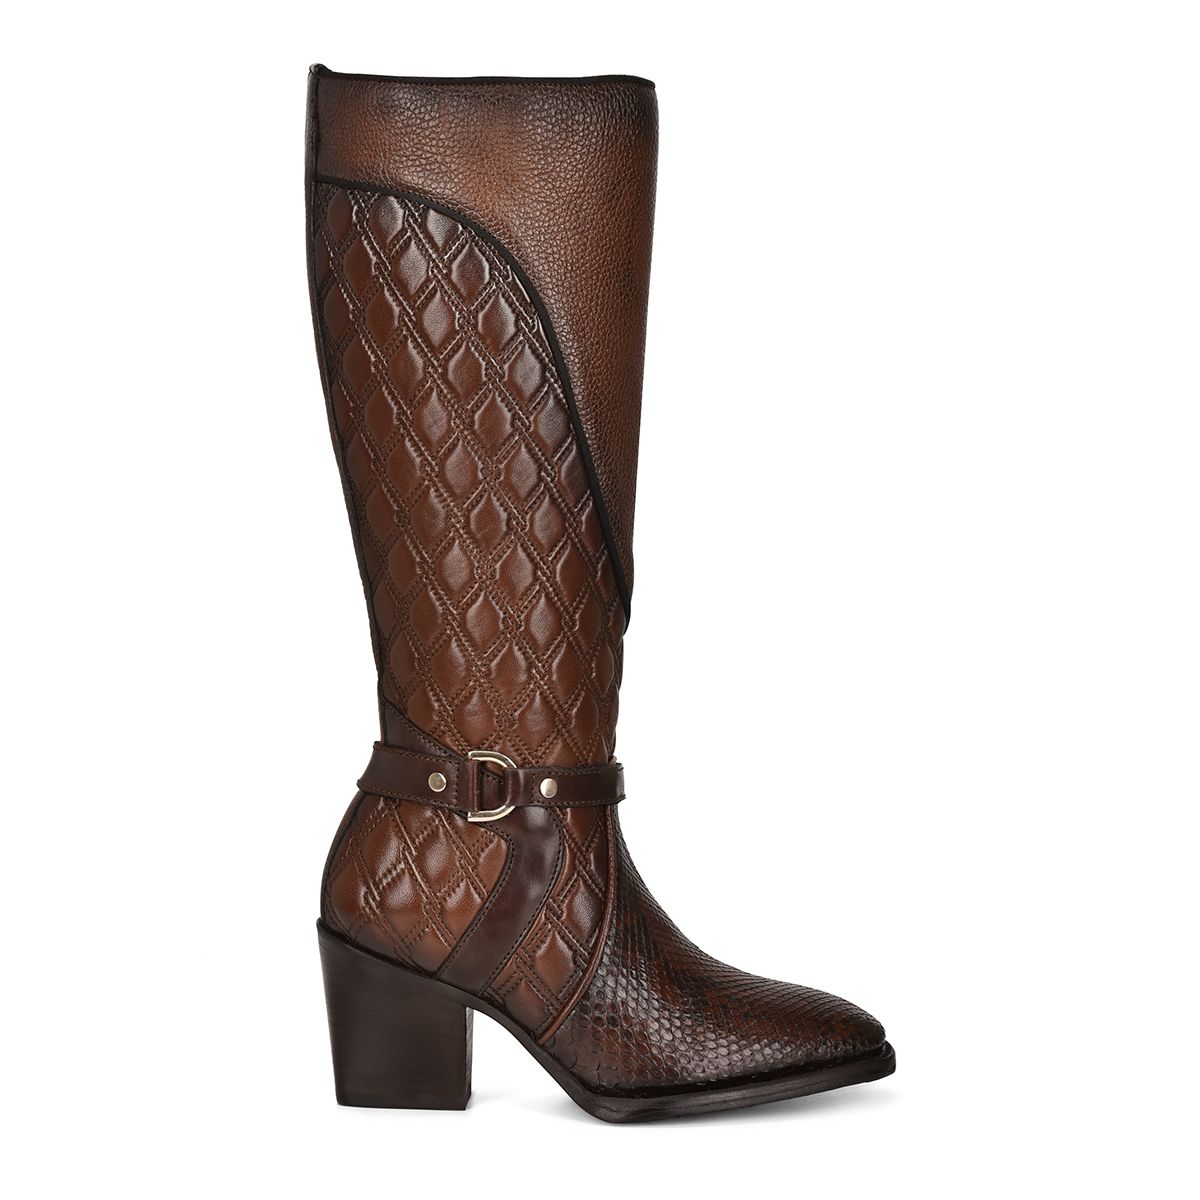 4P05PH - Cuadra brown casual fashion python leather strapped boots for women-CUADRA-Kuet-Cuadra-Boots